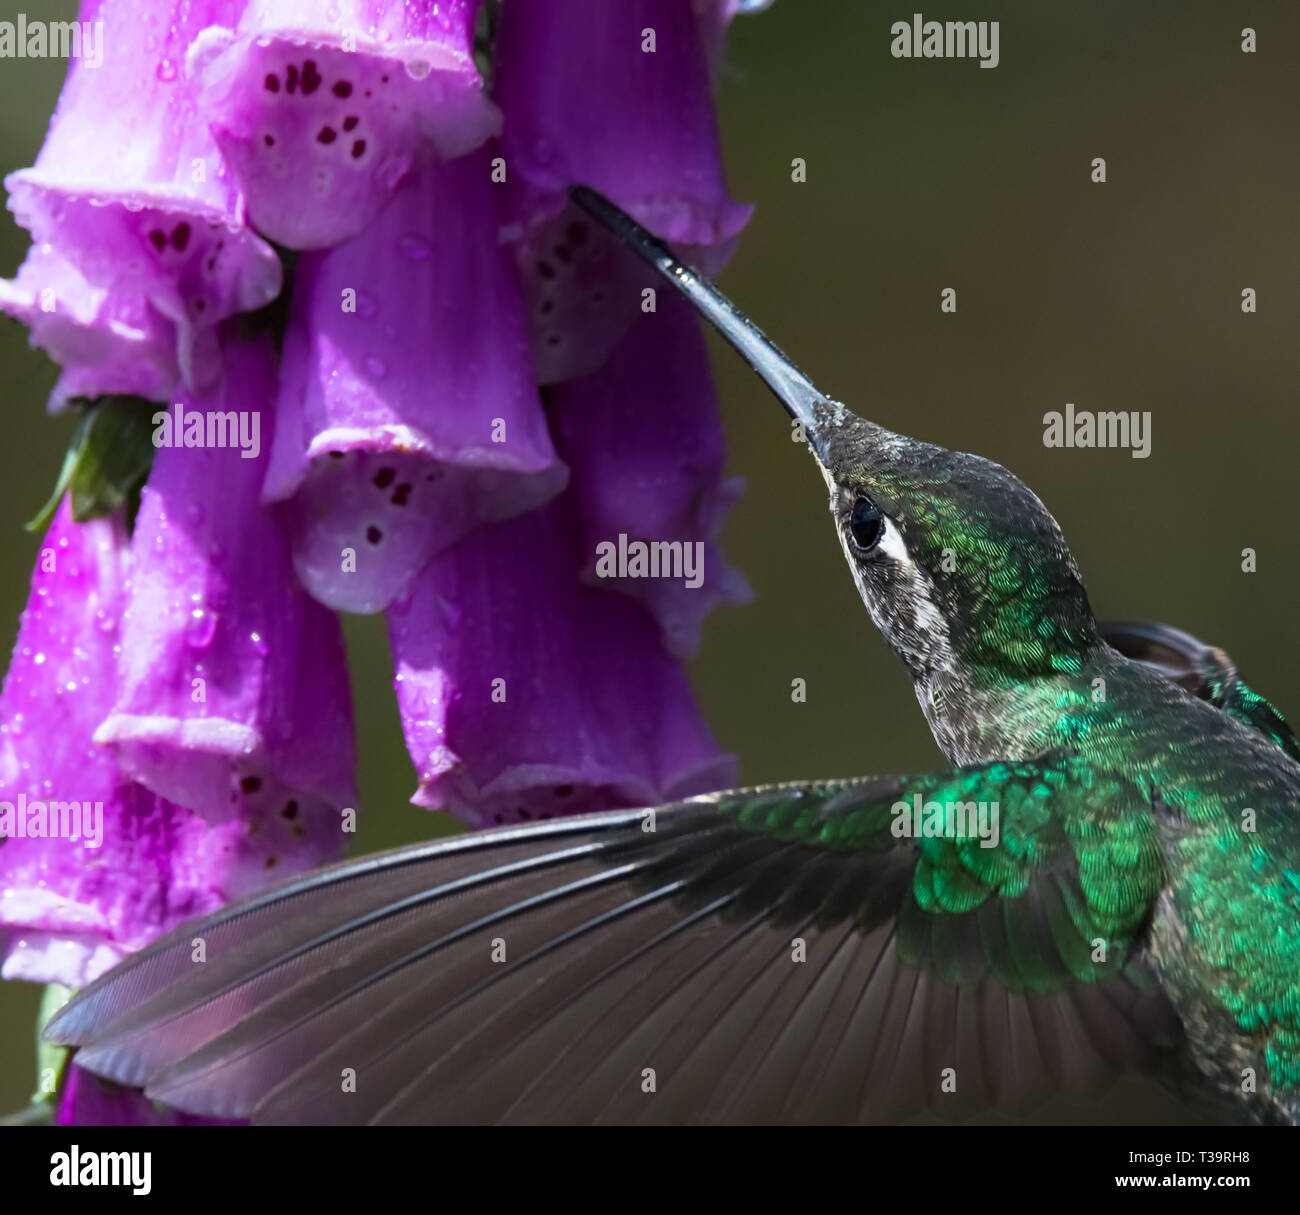 With wings outstretched and almost transparent a Green-crowned Brilliant female hummingbirds stretches its beak out to sip nectar from a pink flower Stock Photo